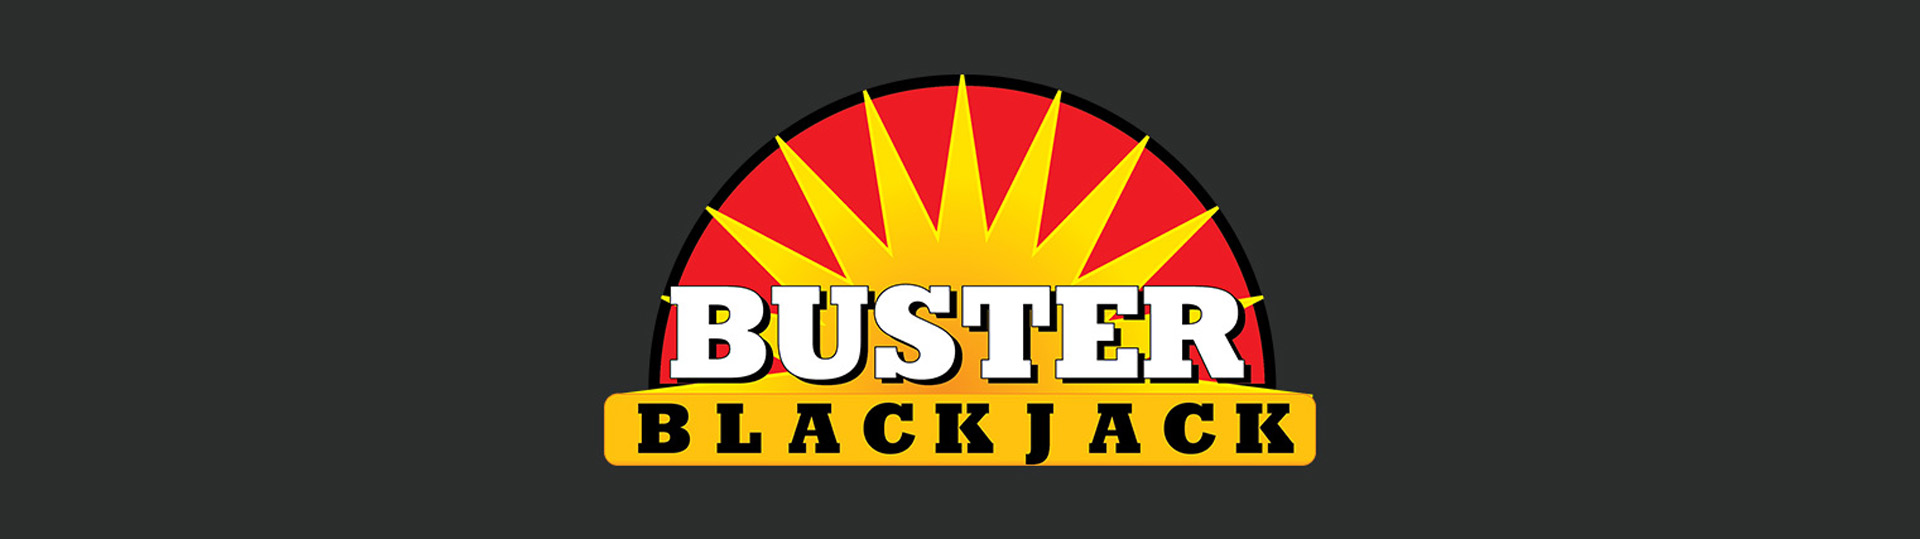 Buster Blackjack: Playtech game review